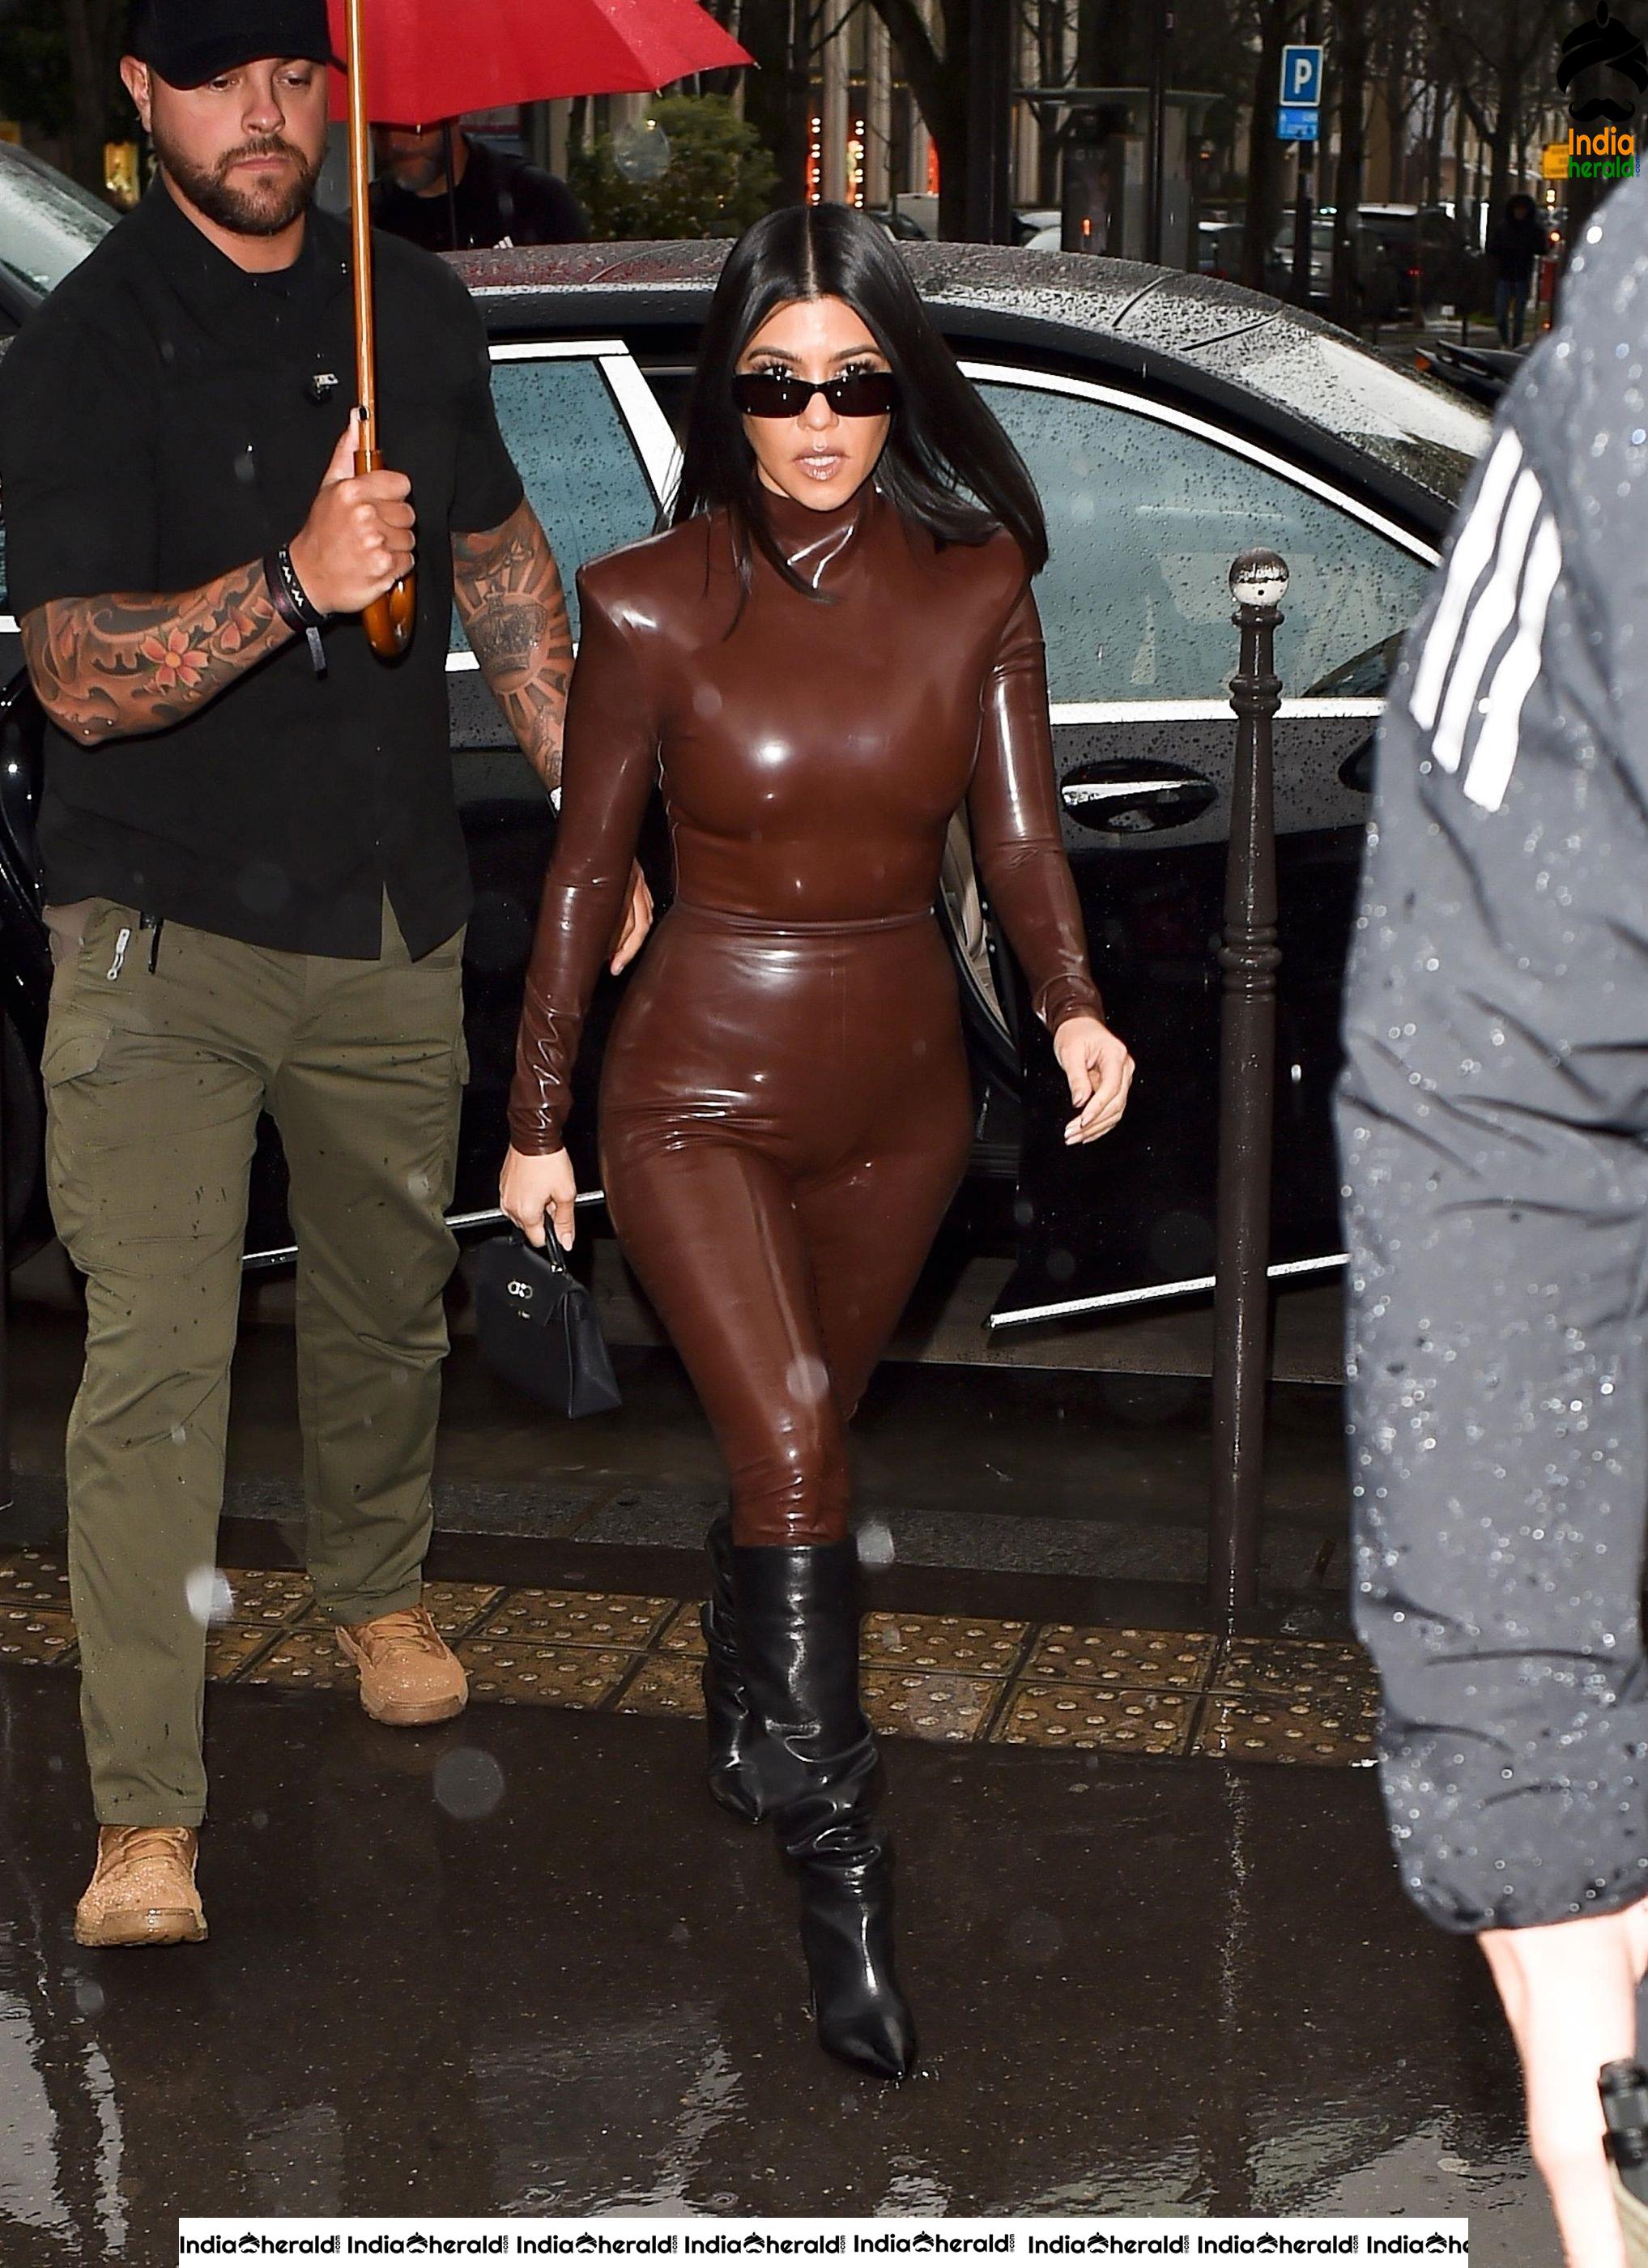 Kourtney Kardashian in a Sexy Latex Outfit seen leaving Church after Sunday Service